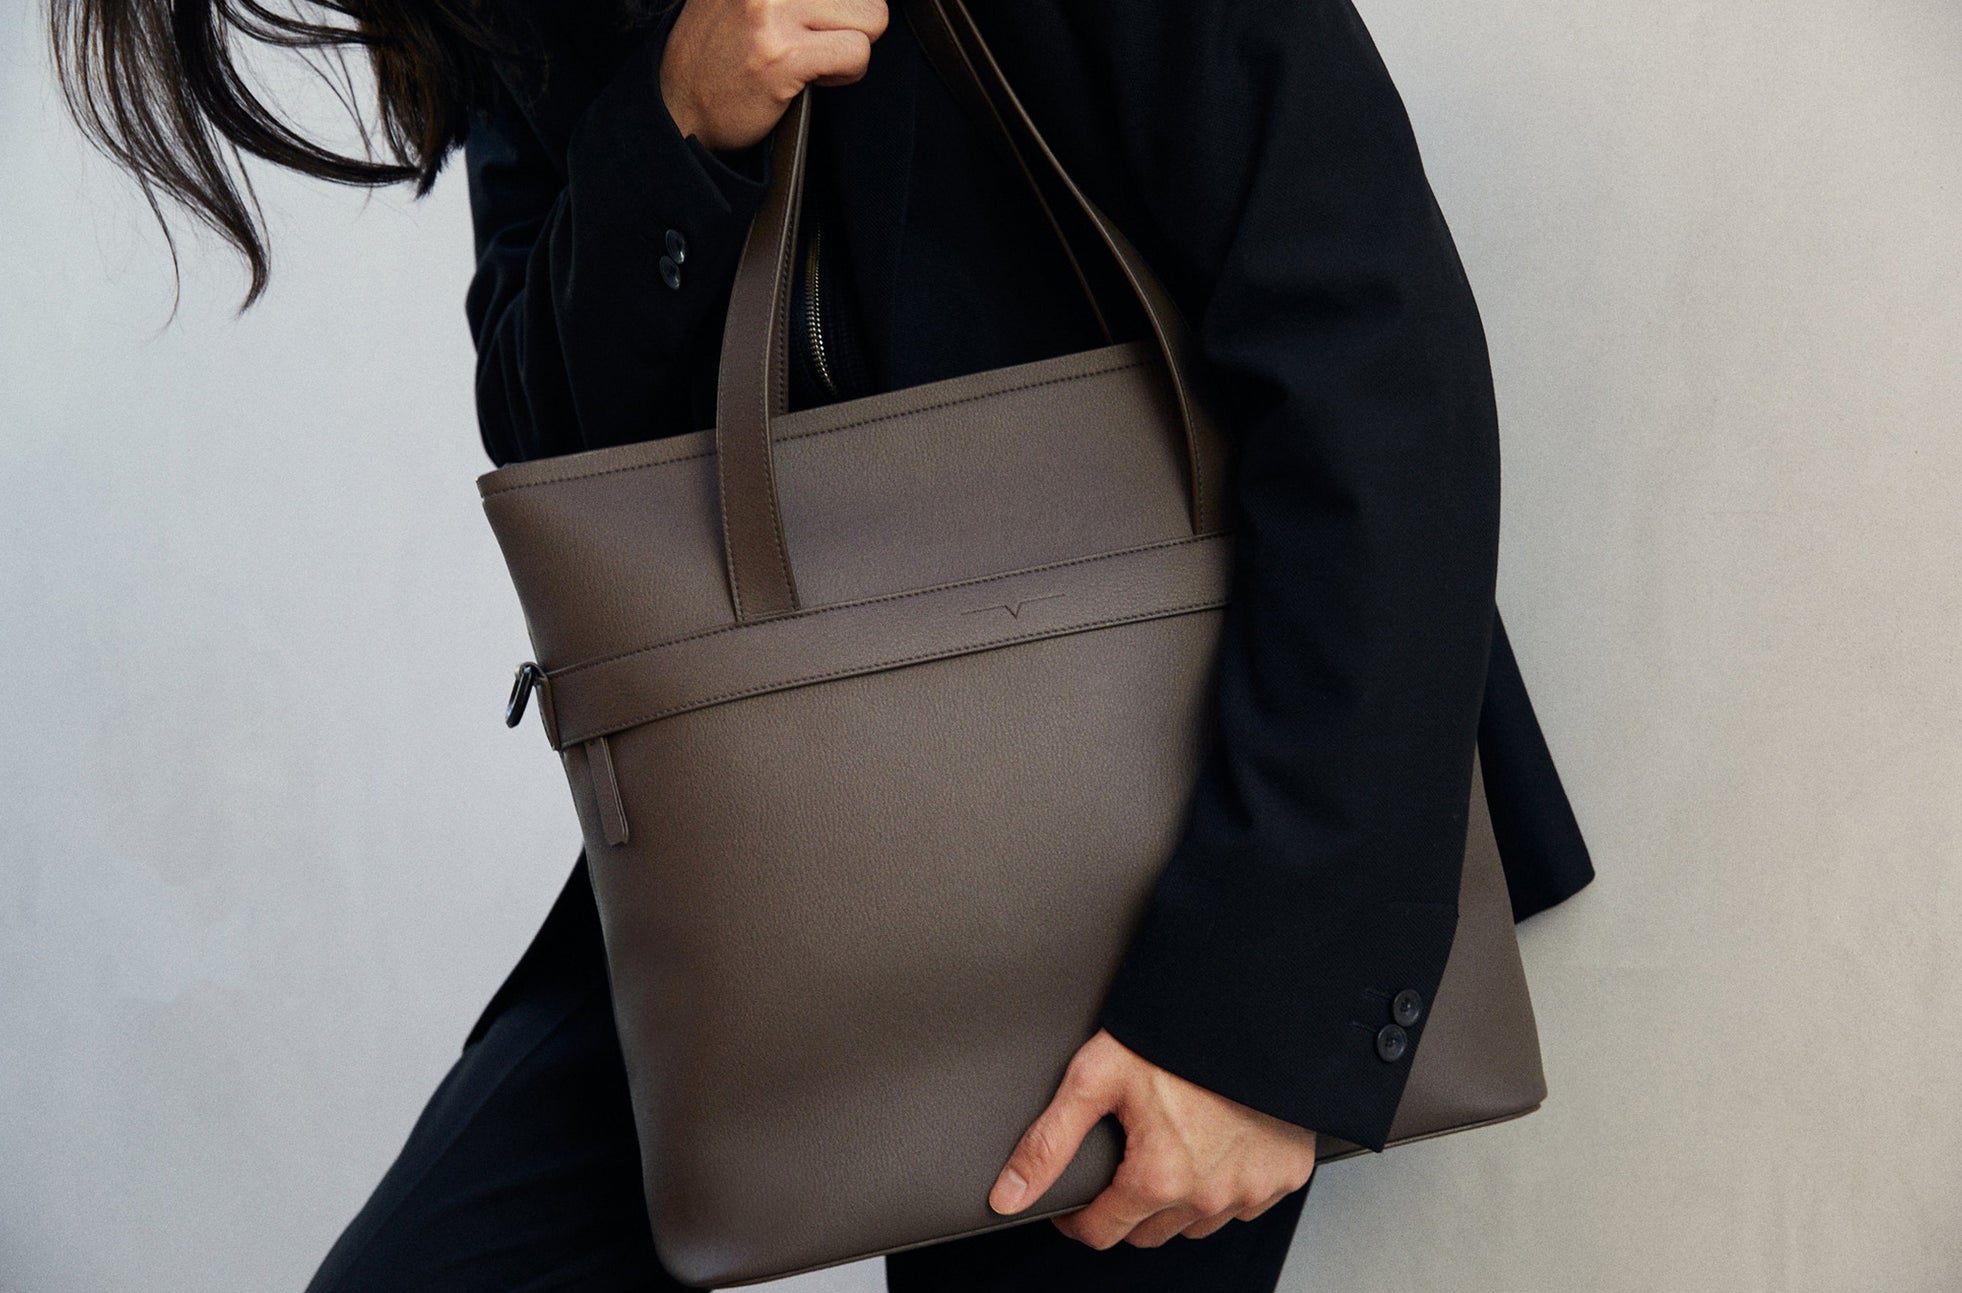 The Zipper Tote in Technik-Leather in Taupe image 2